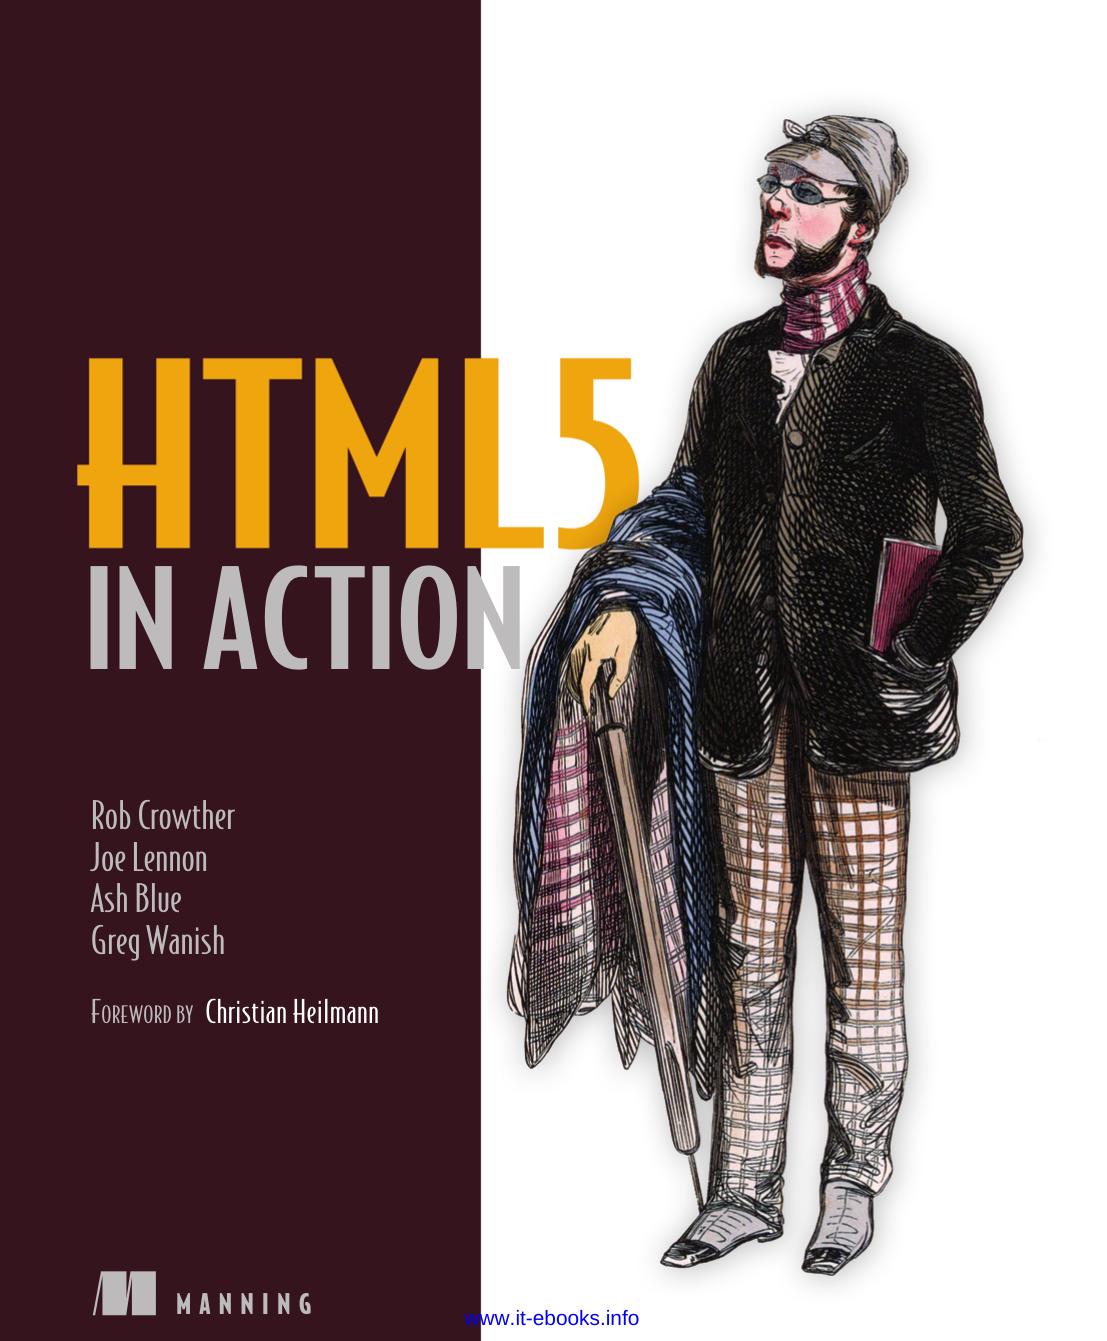 HTML5 in Action by Rob Crowther Joe Lennon Ash Blue Greg Wanish